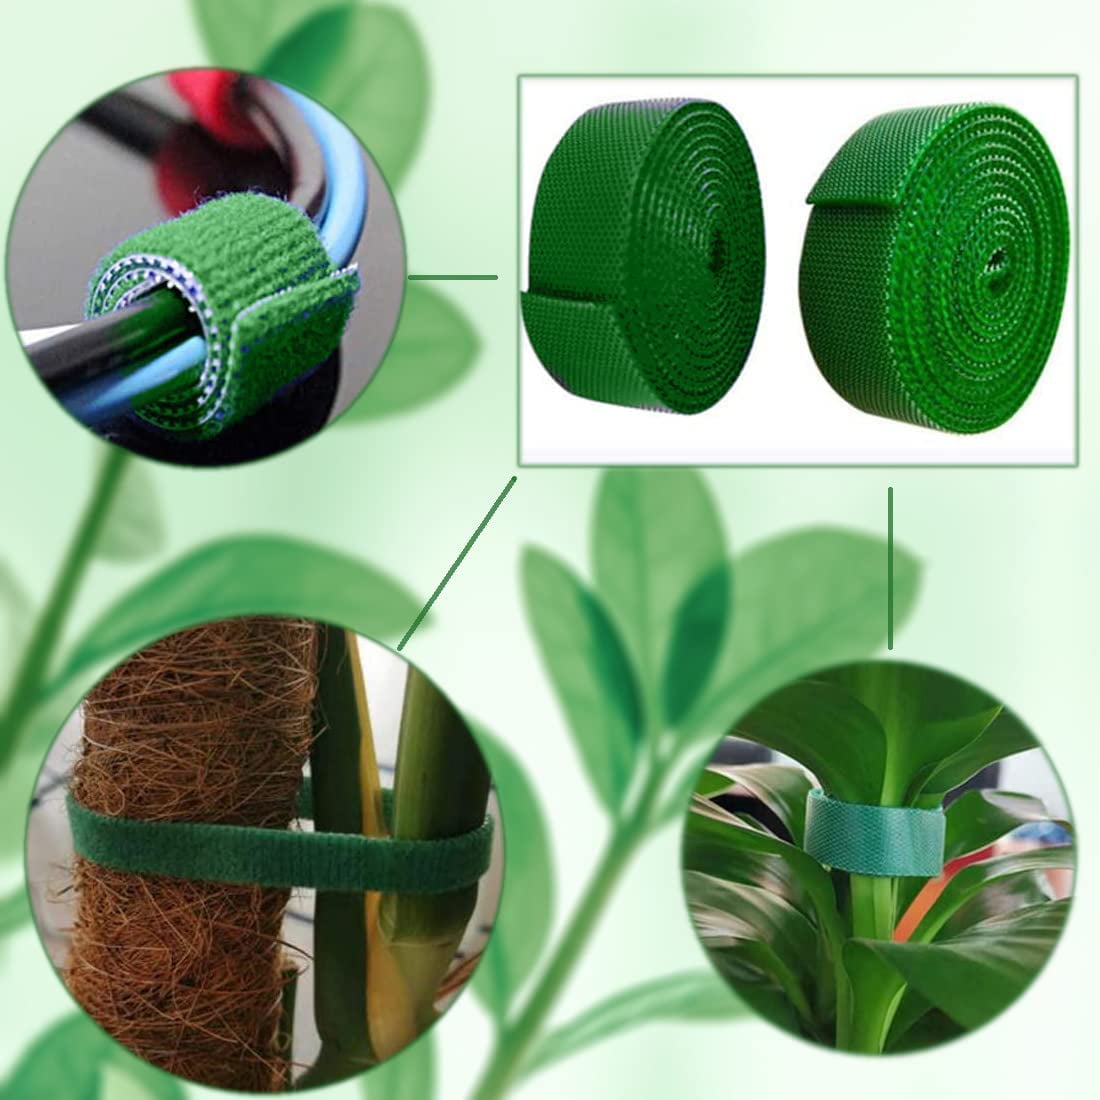 Plant Ties - With Velcro Closure - Resealable - Perforated to Tear